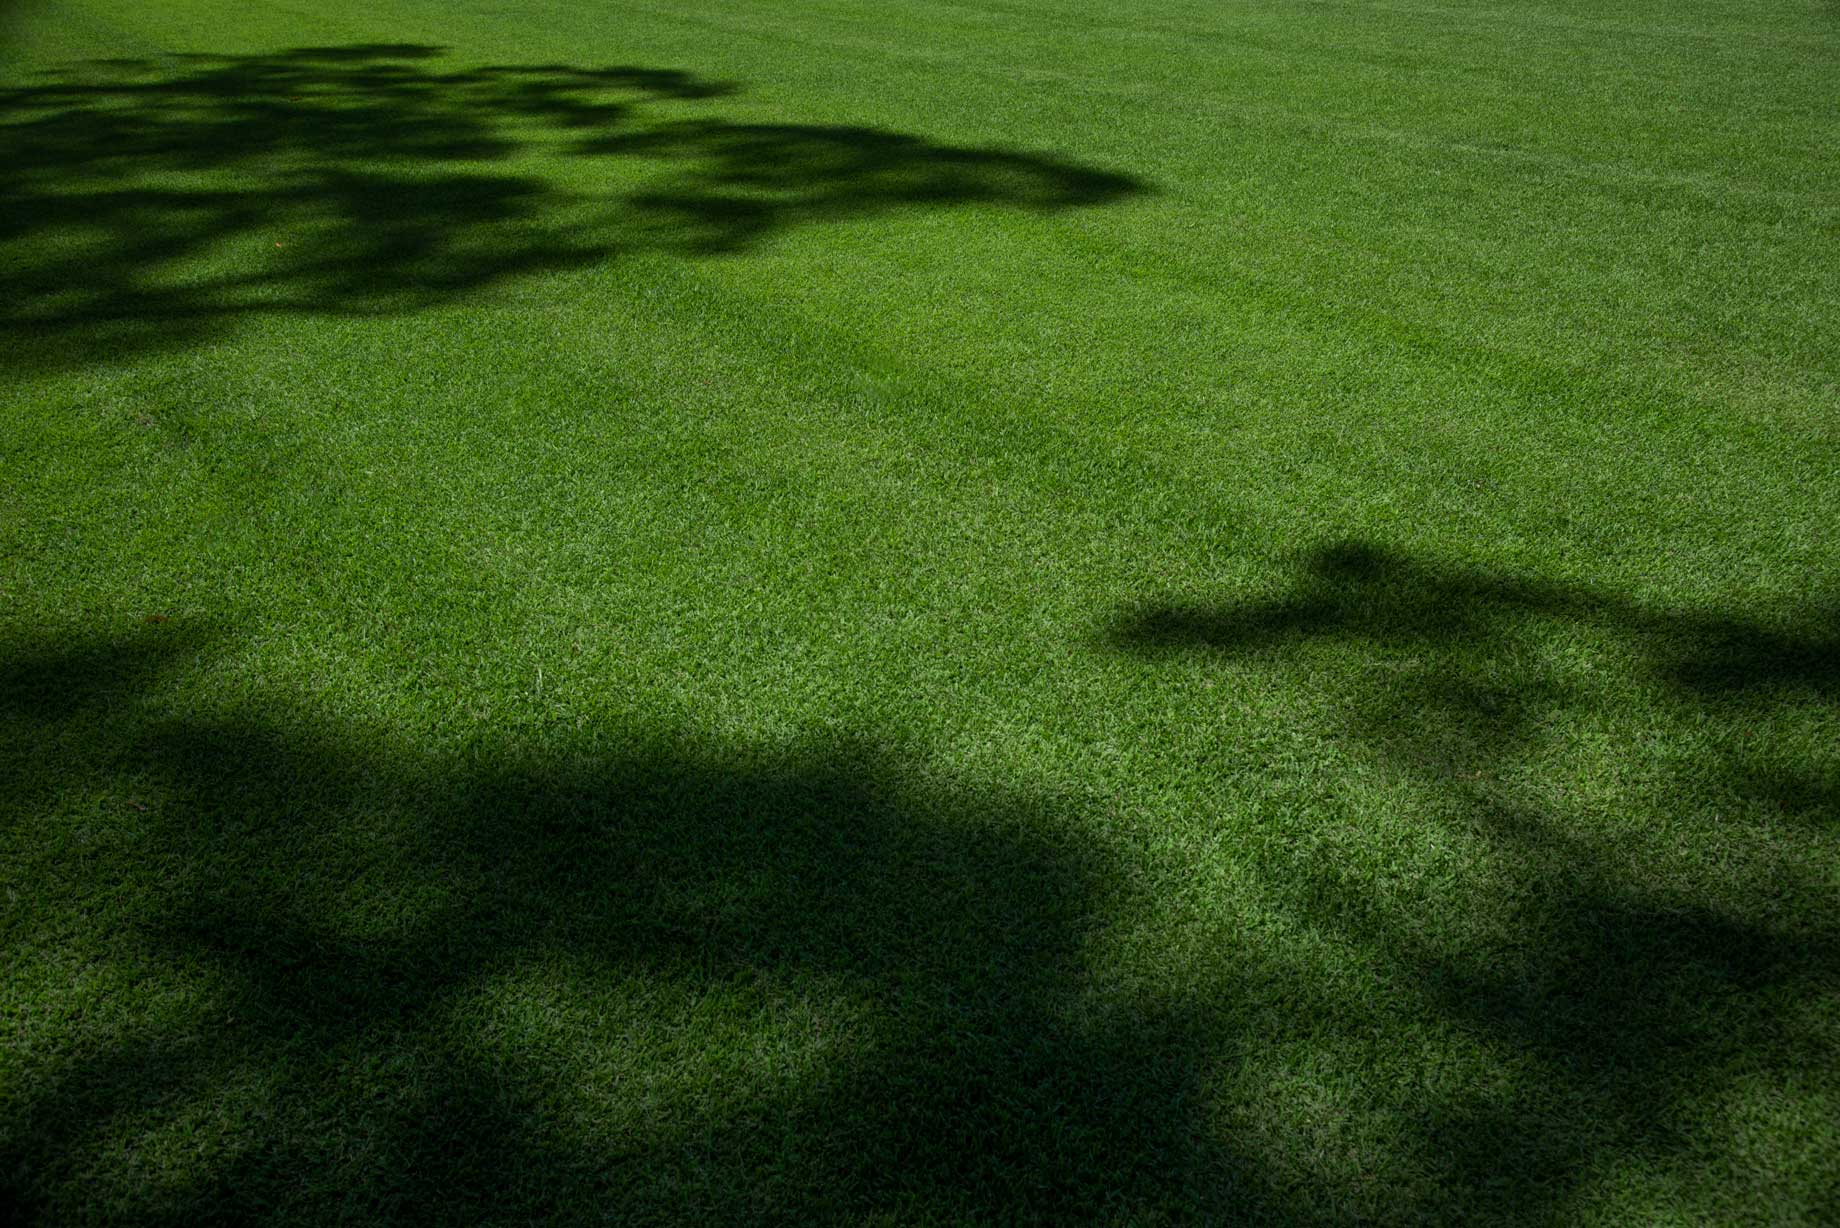 Large area of grass | Featured image for the Lawn Grub Control, Detection and Prevention blog from Centenary Landscaping Supplies.